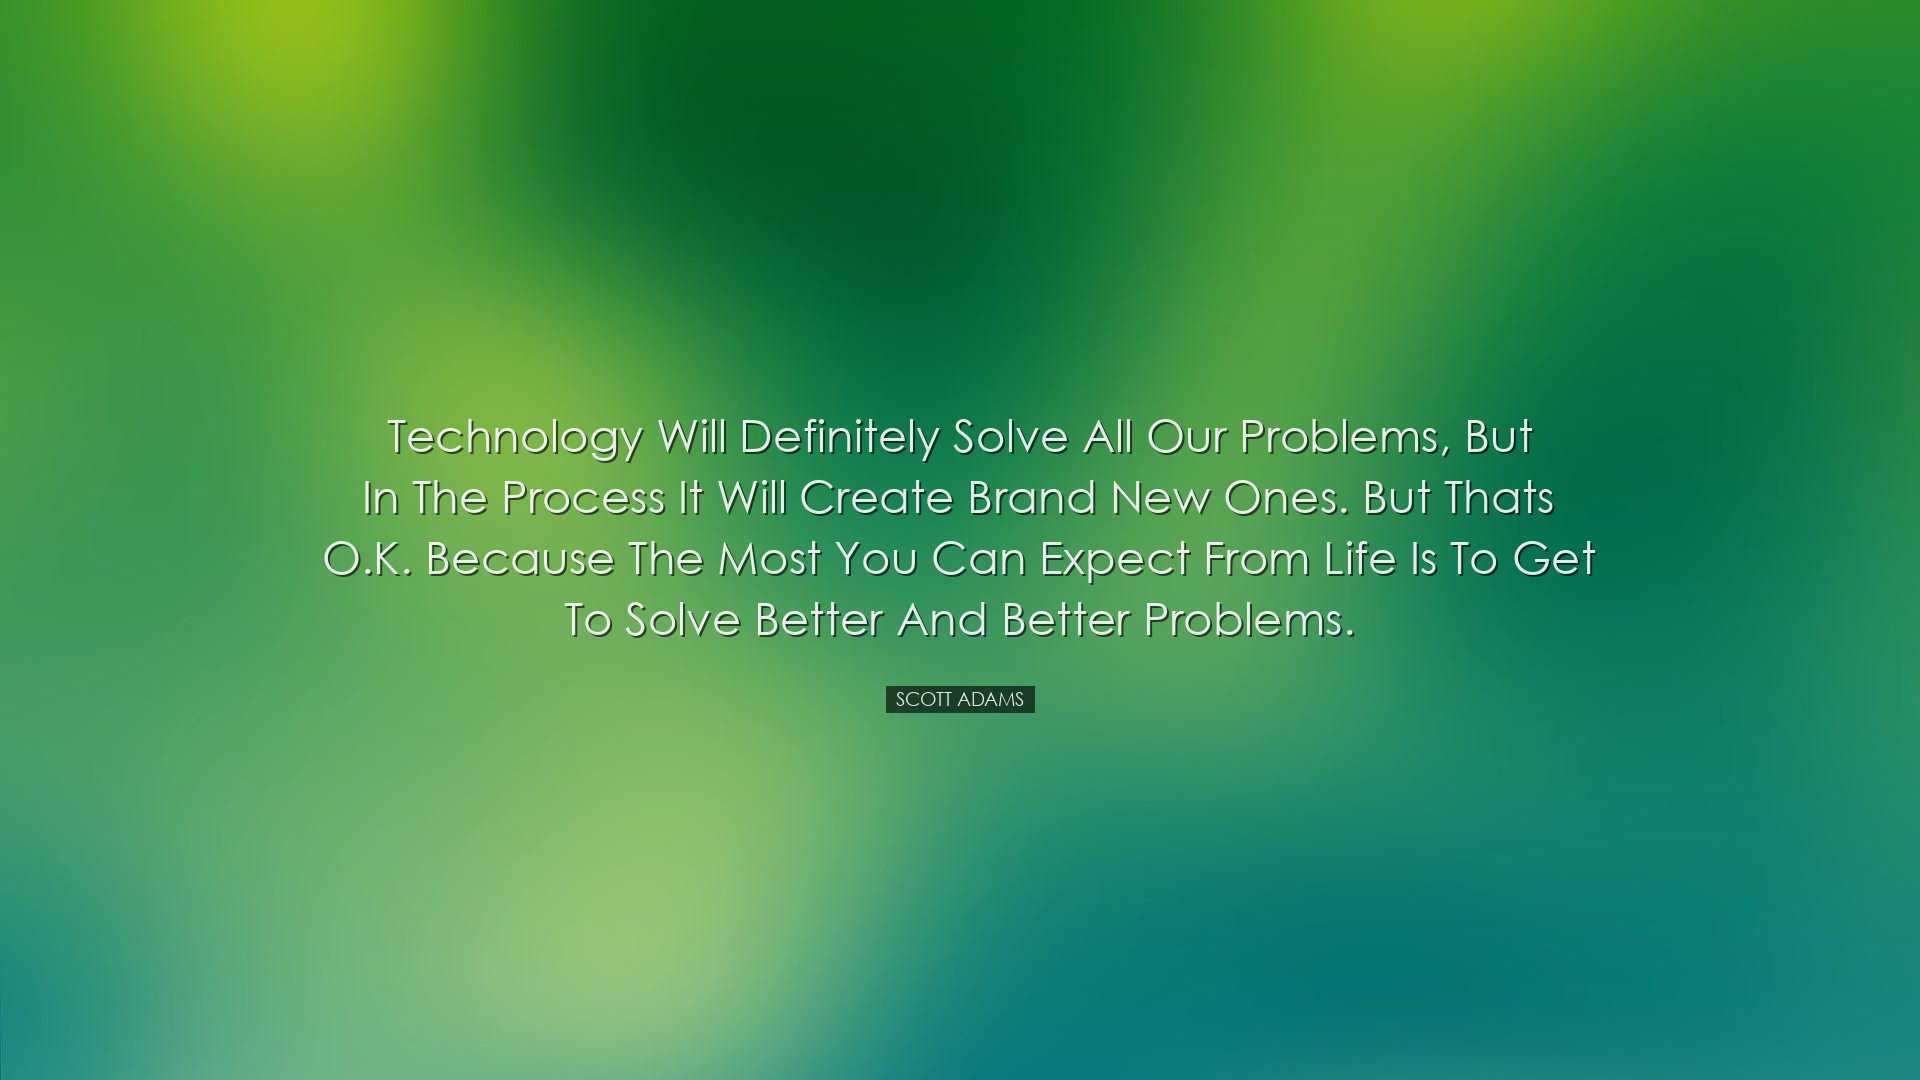 Technology will definitely solve all our problems, but in the proc